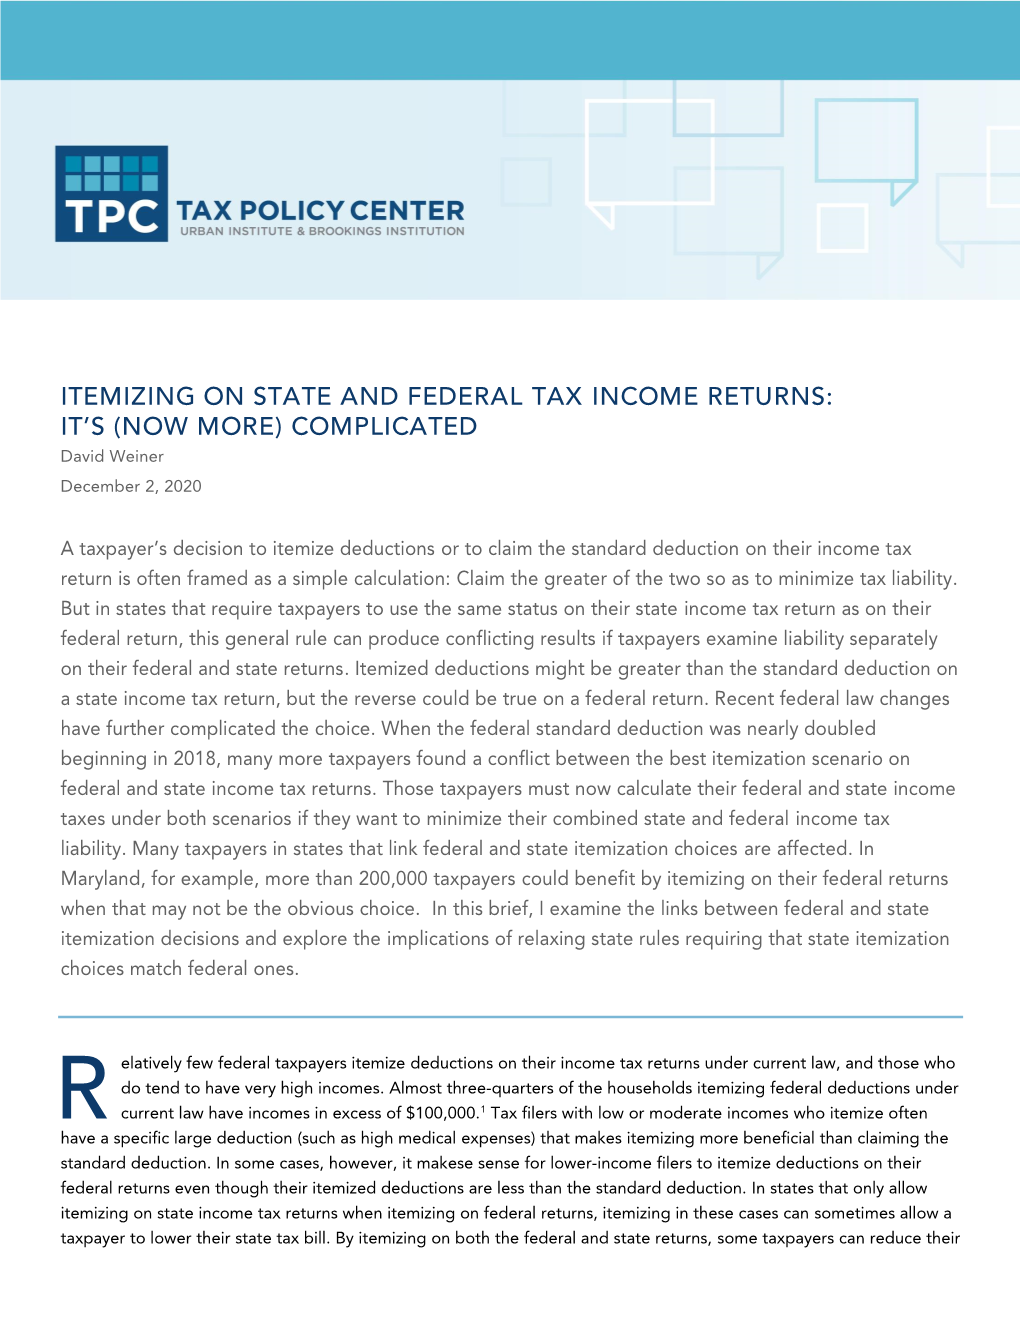 ITEMIZING on STATE and FEDERAL TAX INCOME RETURNS: IT’S (NOW MORE) COMPLICATED David Weiner December 2, 2020